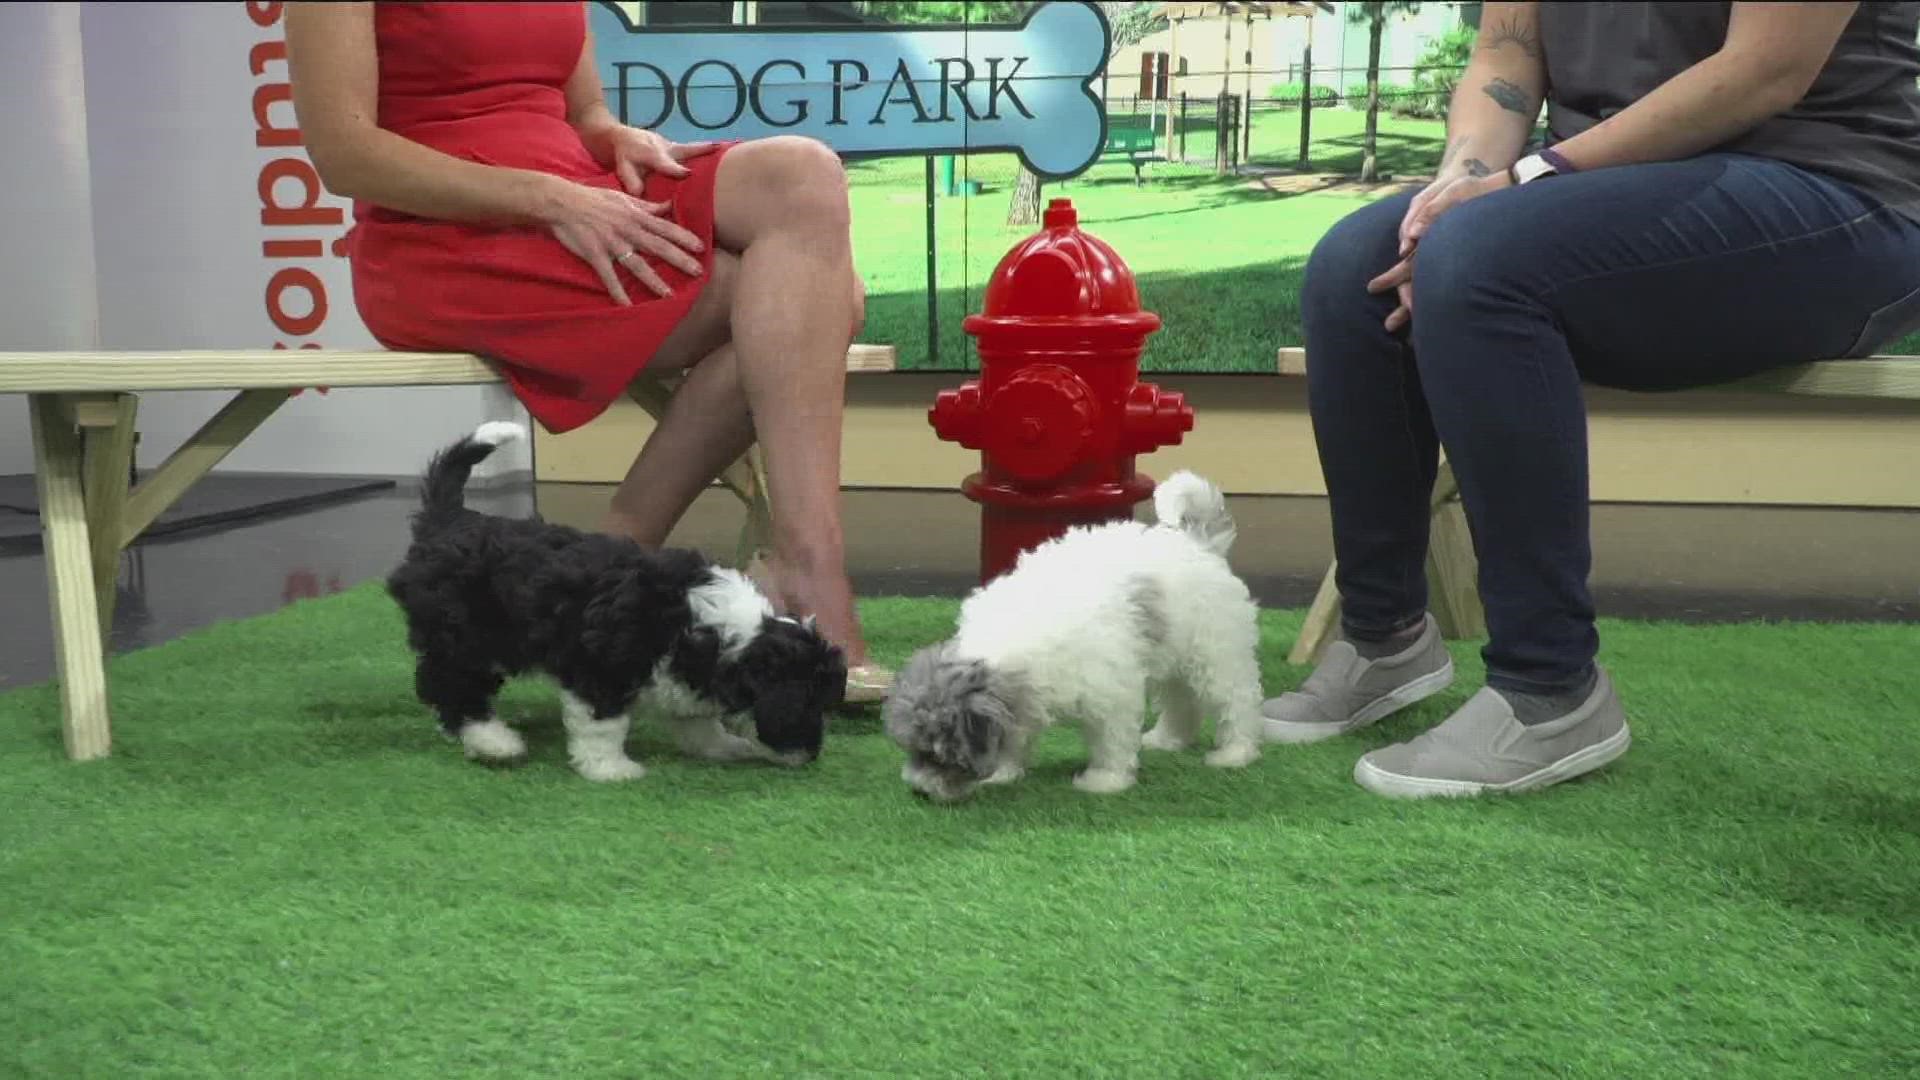 As the first week of our Clear the Shelters initiative closes, 3News' Betsy Kling chats with Erin Hawes, shelter manager at Rescue Village, about adopting pets.